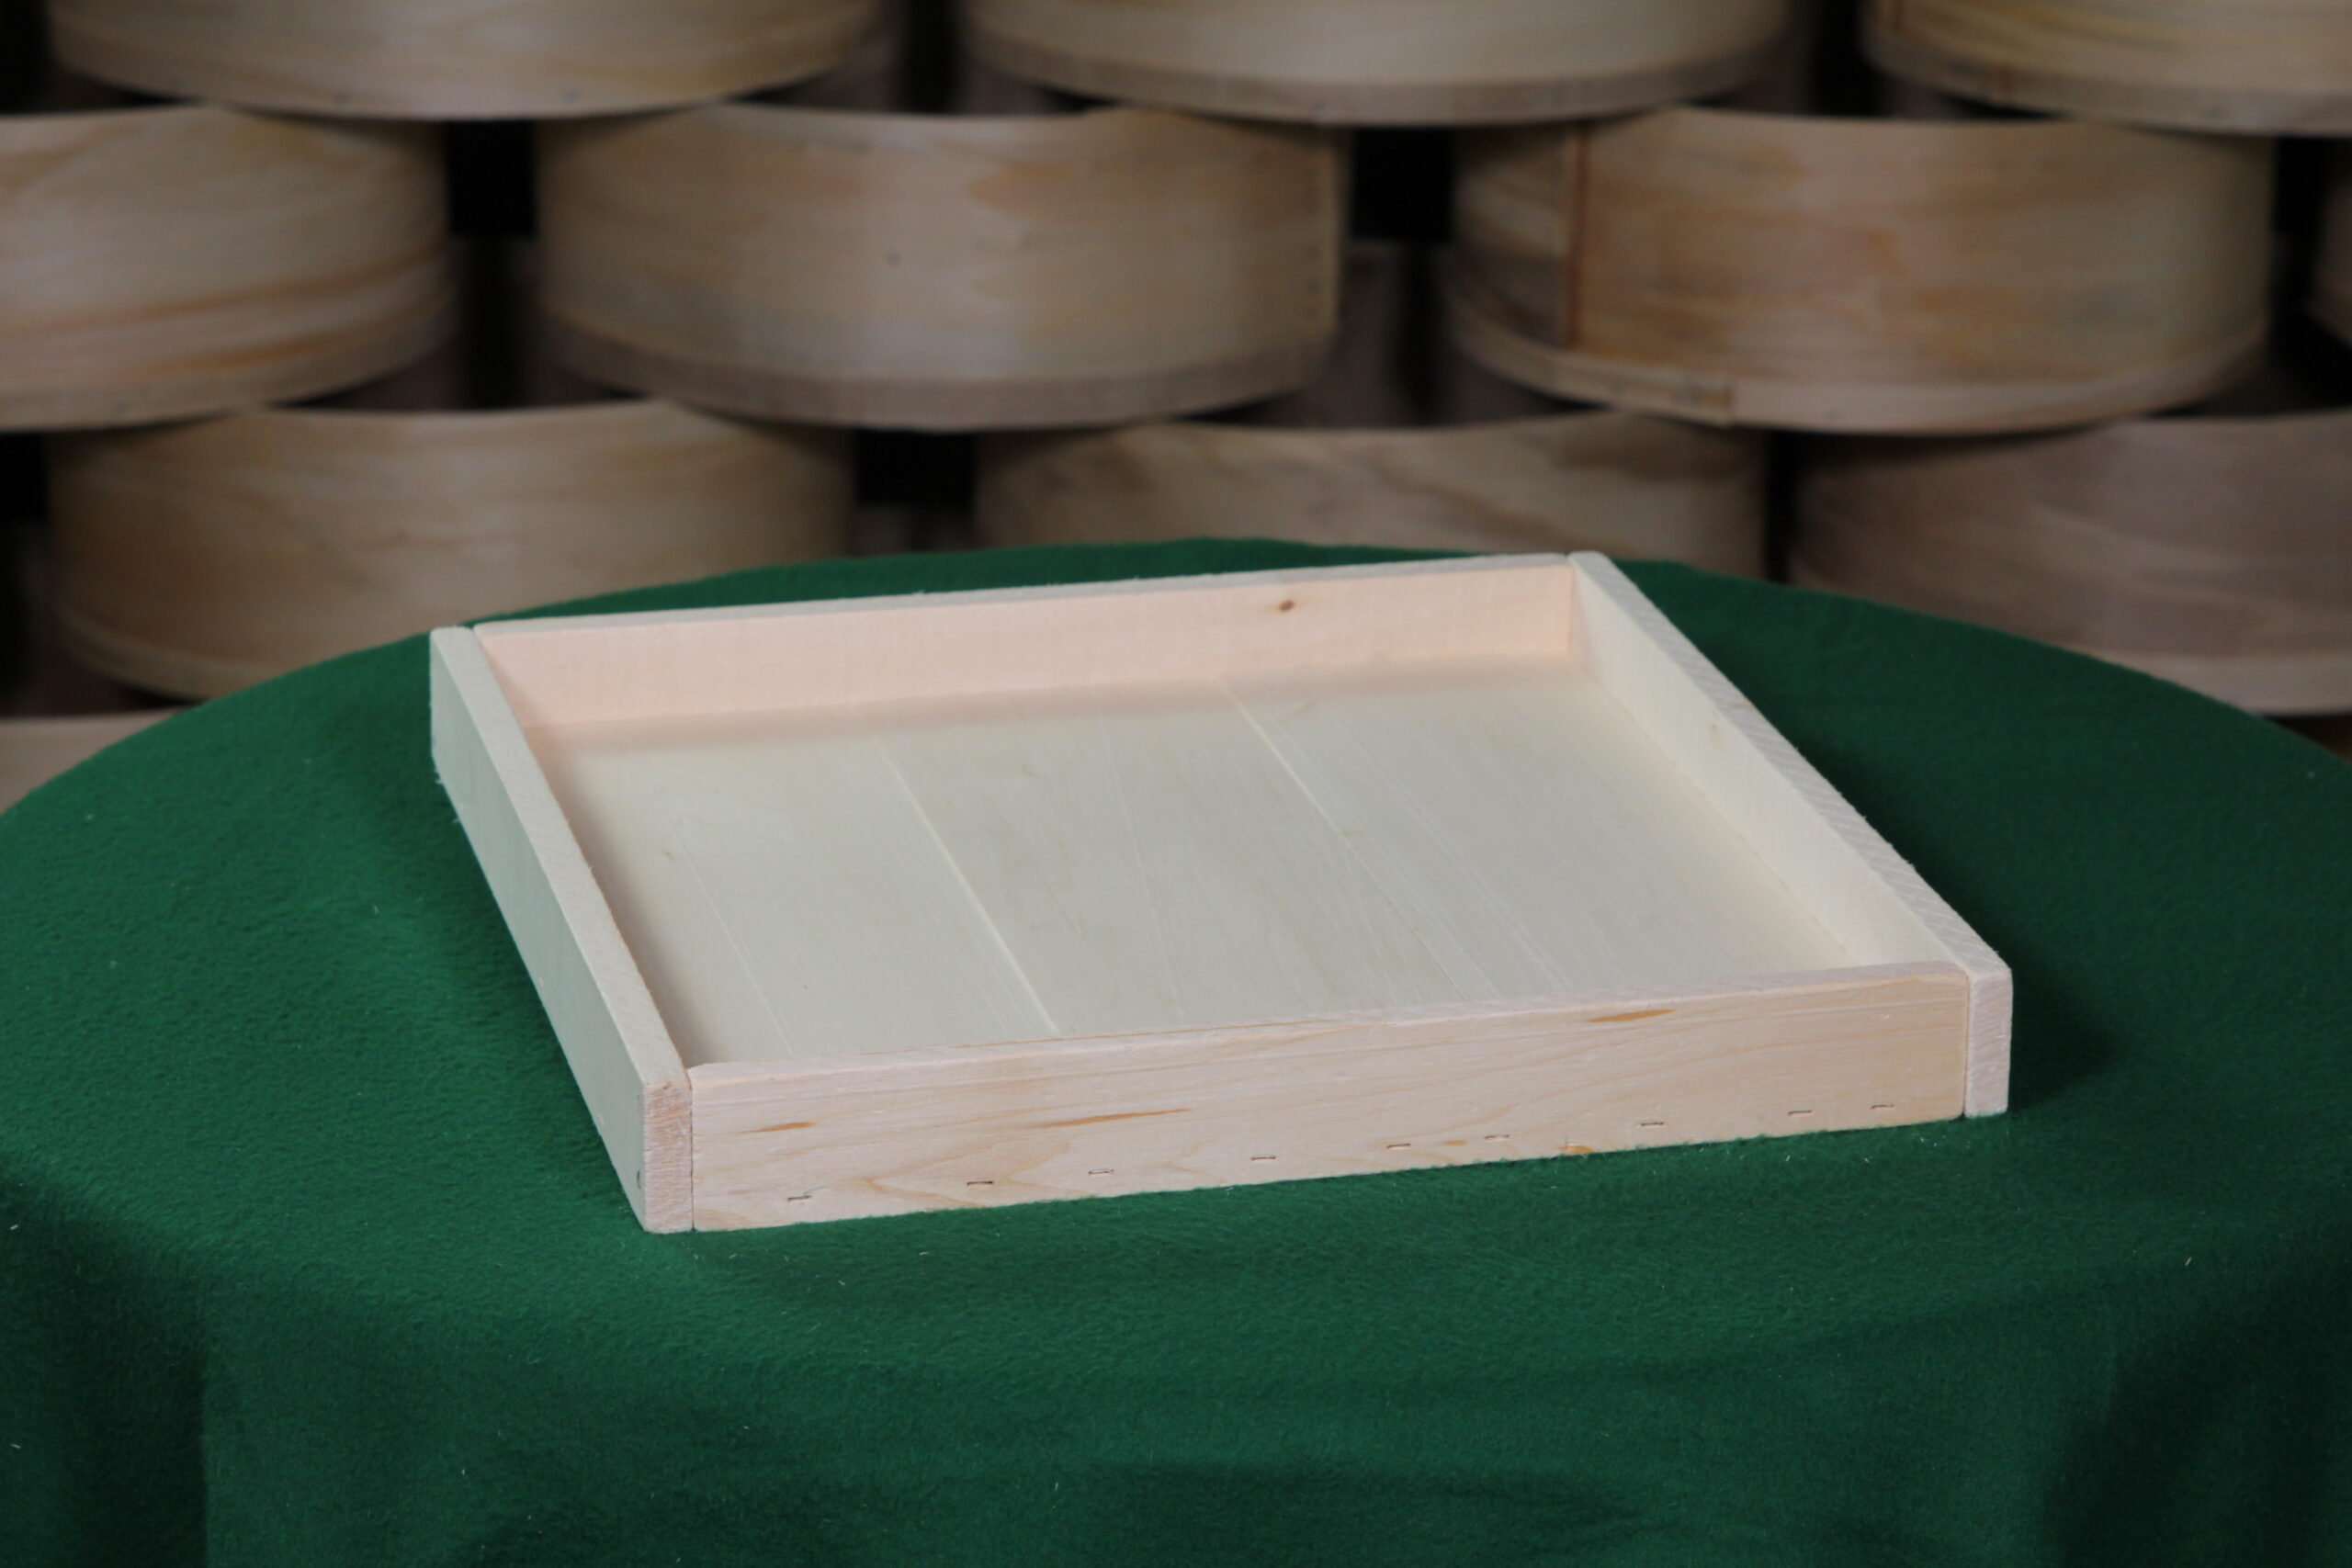 x 12" Catering Tray | Dufeck Wood Products